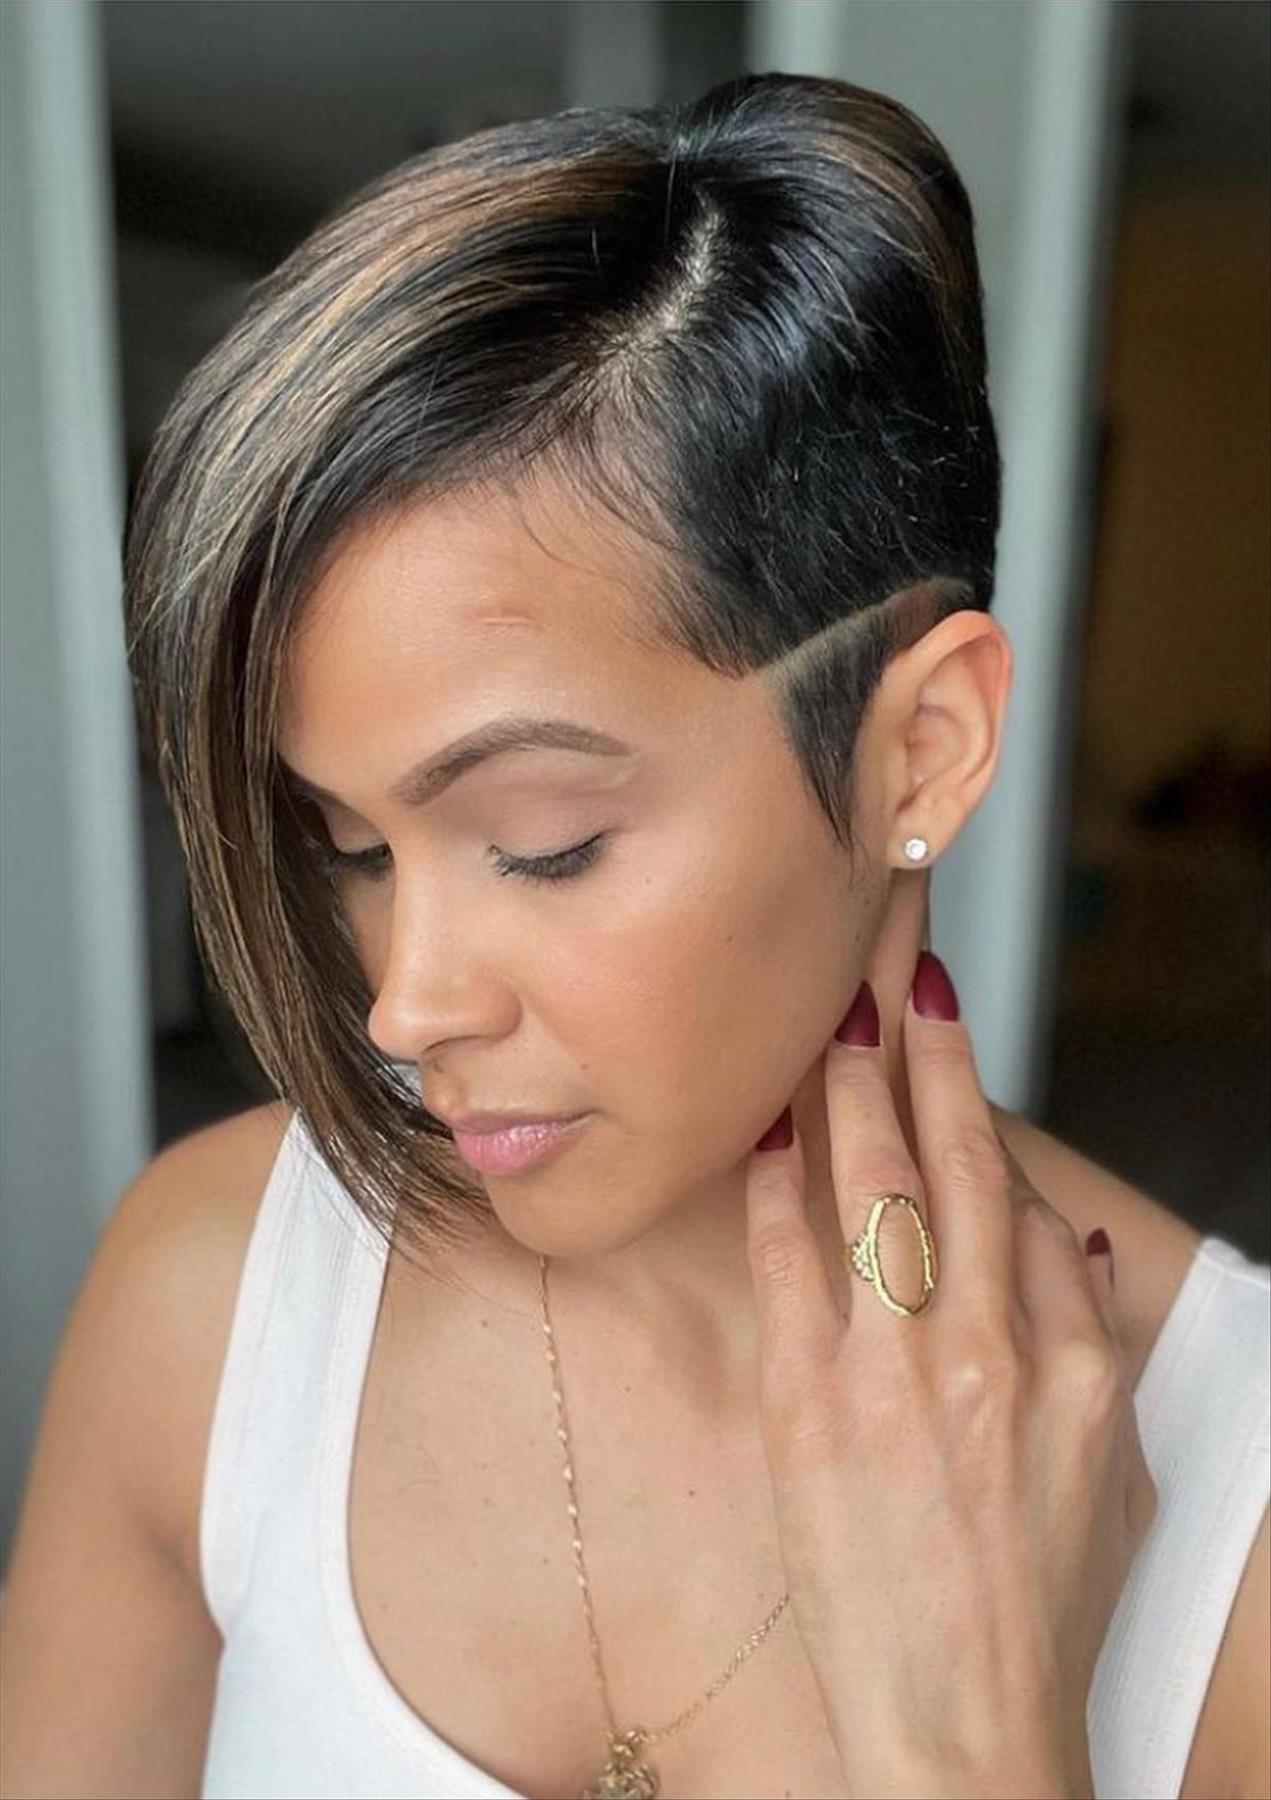 Short Pixie Haircuts for Women: Embracing Confidence and Freedom